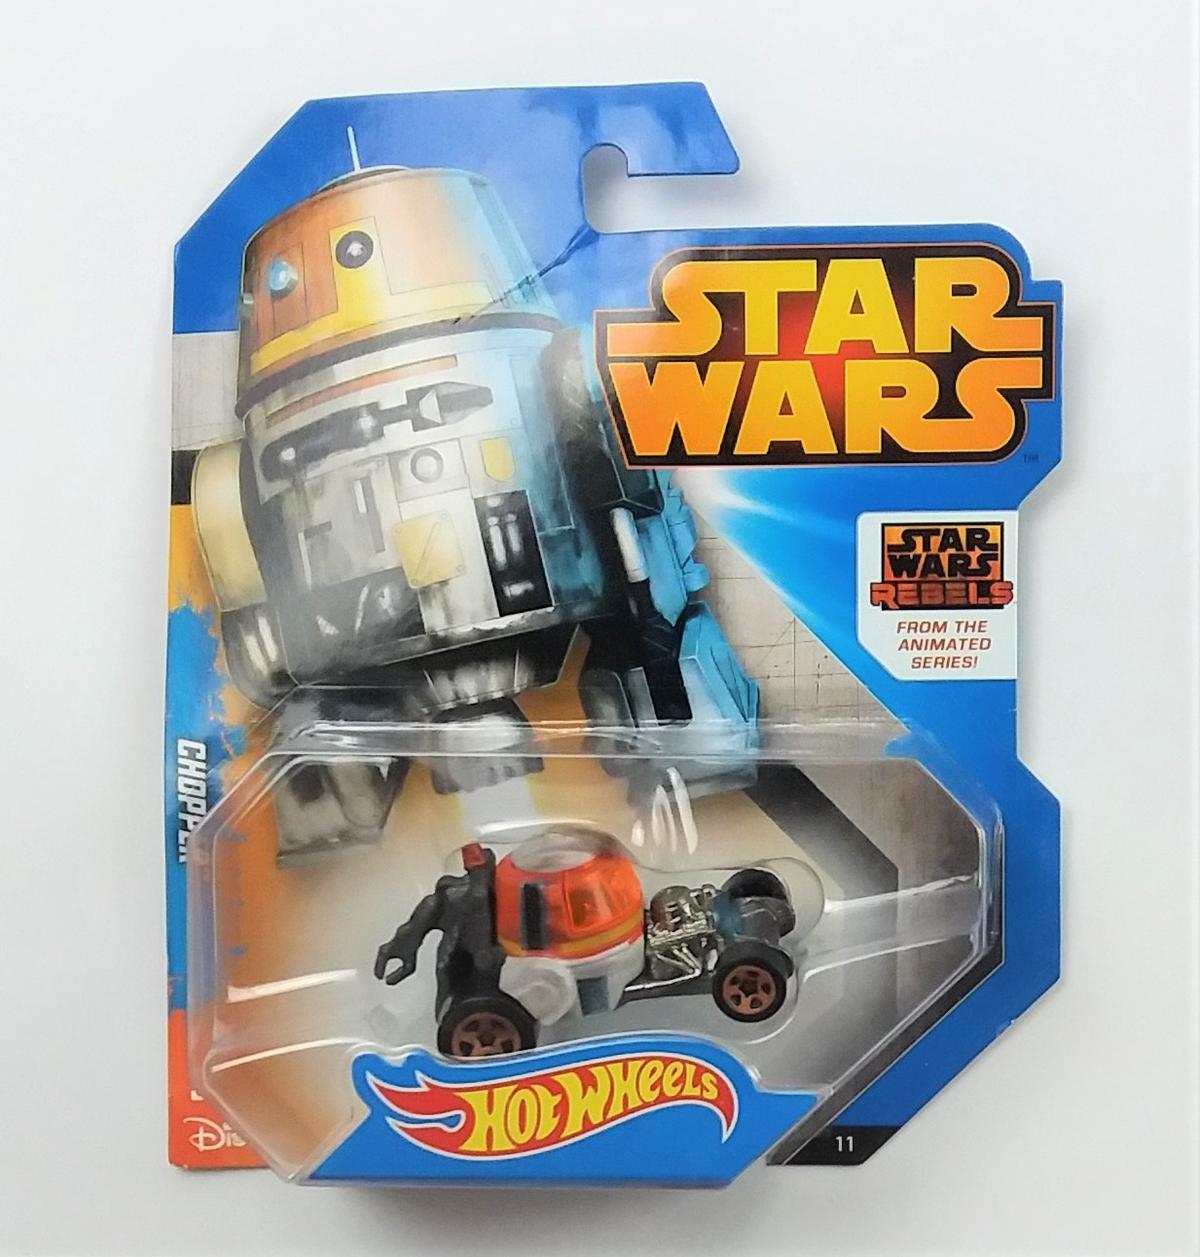 Chopper Hot Wheels Star Wars Character Cars Die Cast Collectible Vehicle